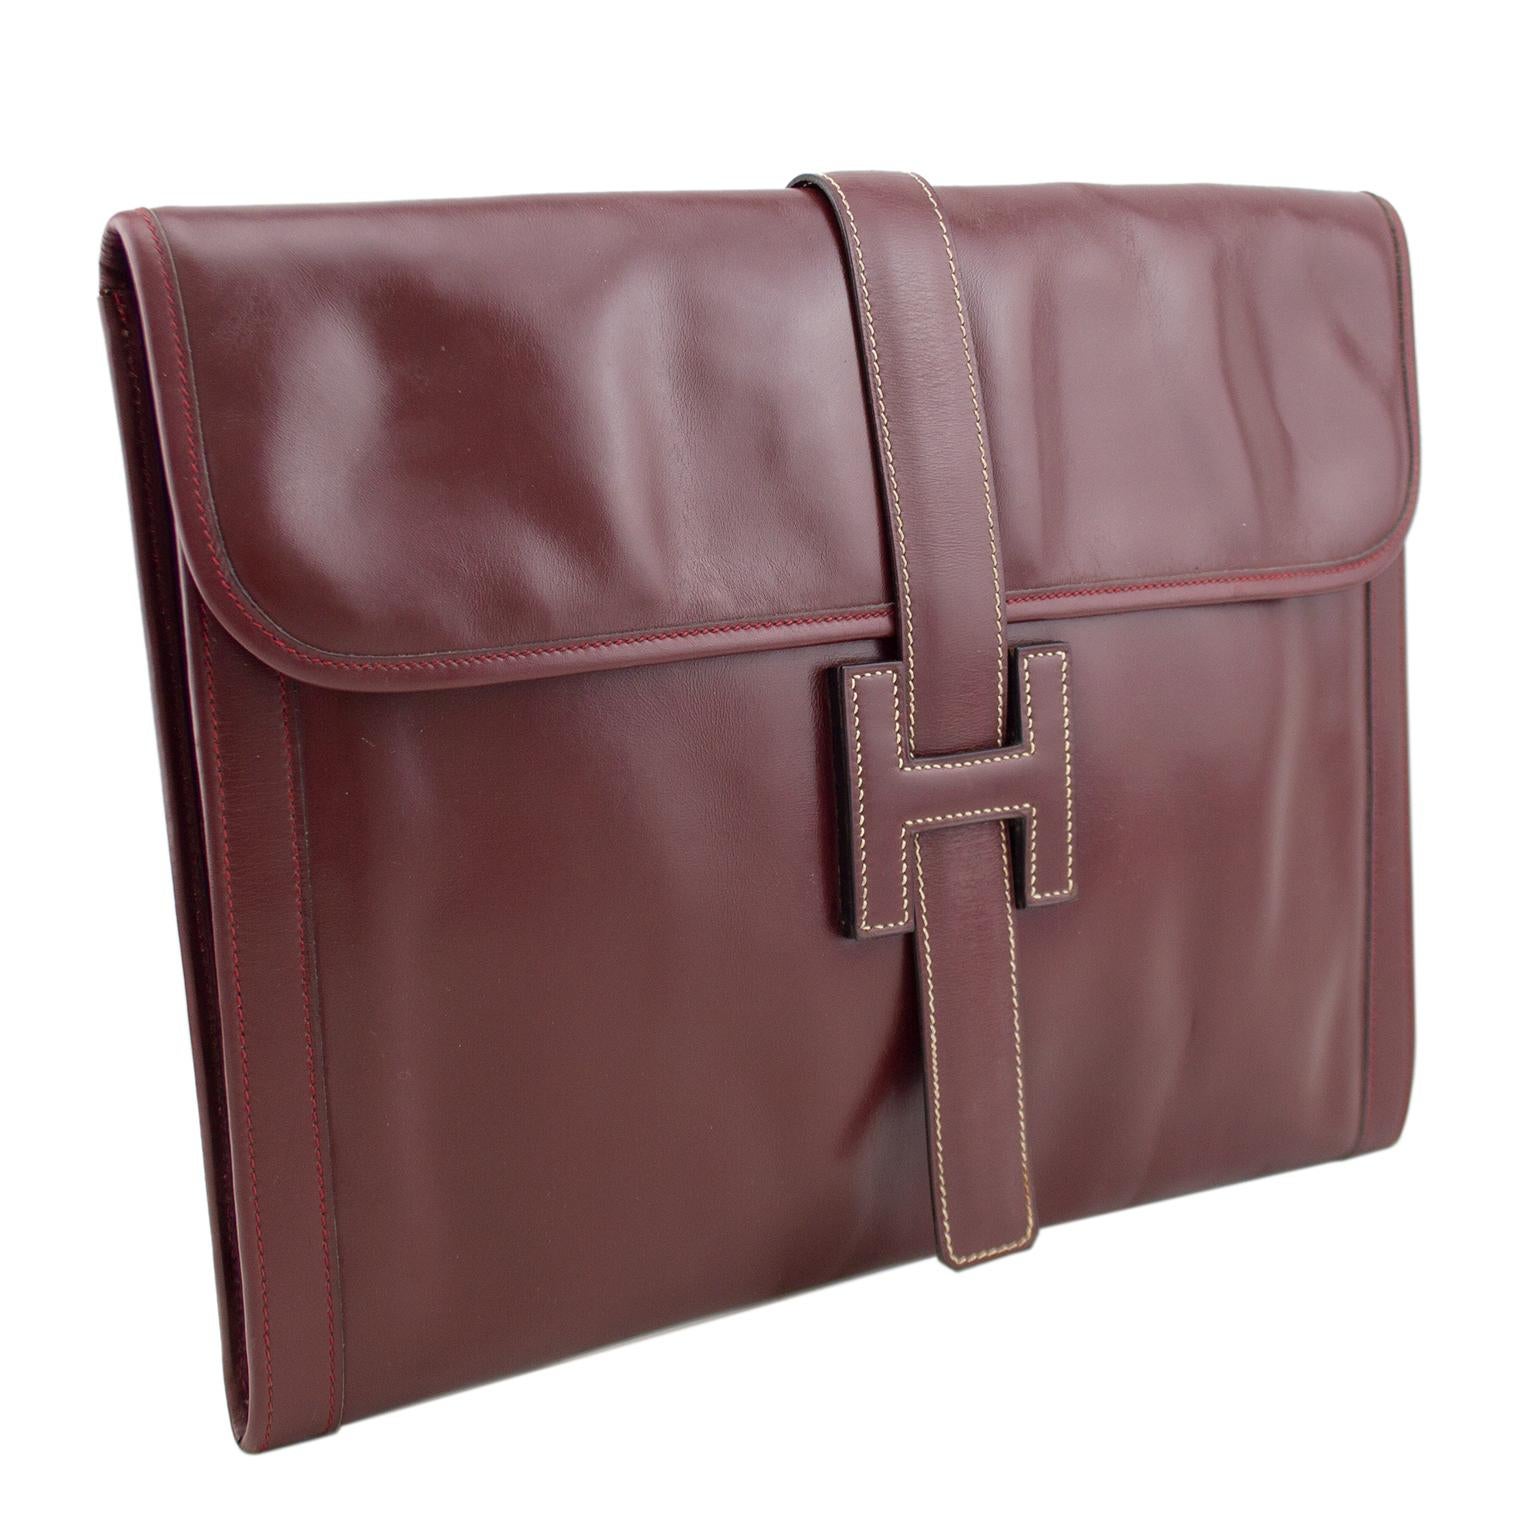 A classic day-to-night clutch that never goes out of the style, this Hermés Jige dates from the same year as its creation, 1975. This maroon leather version has the H style leather clasp on the front with a top flap opening. Finished with cream and